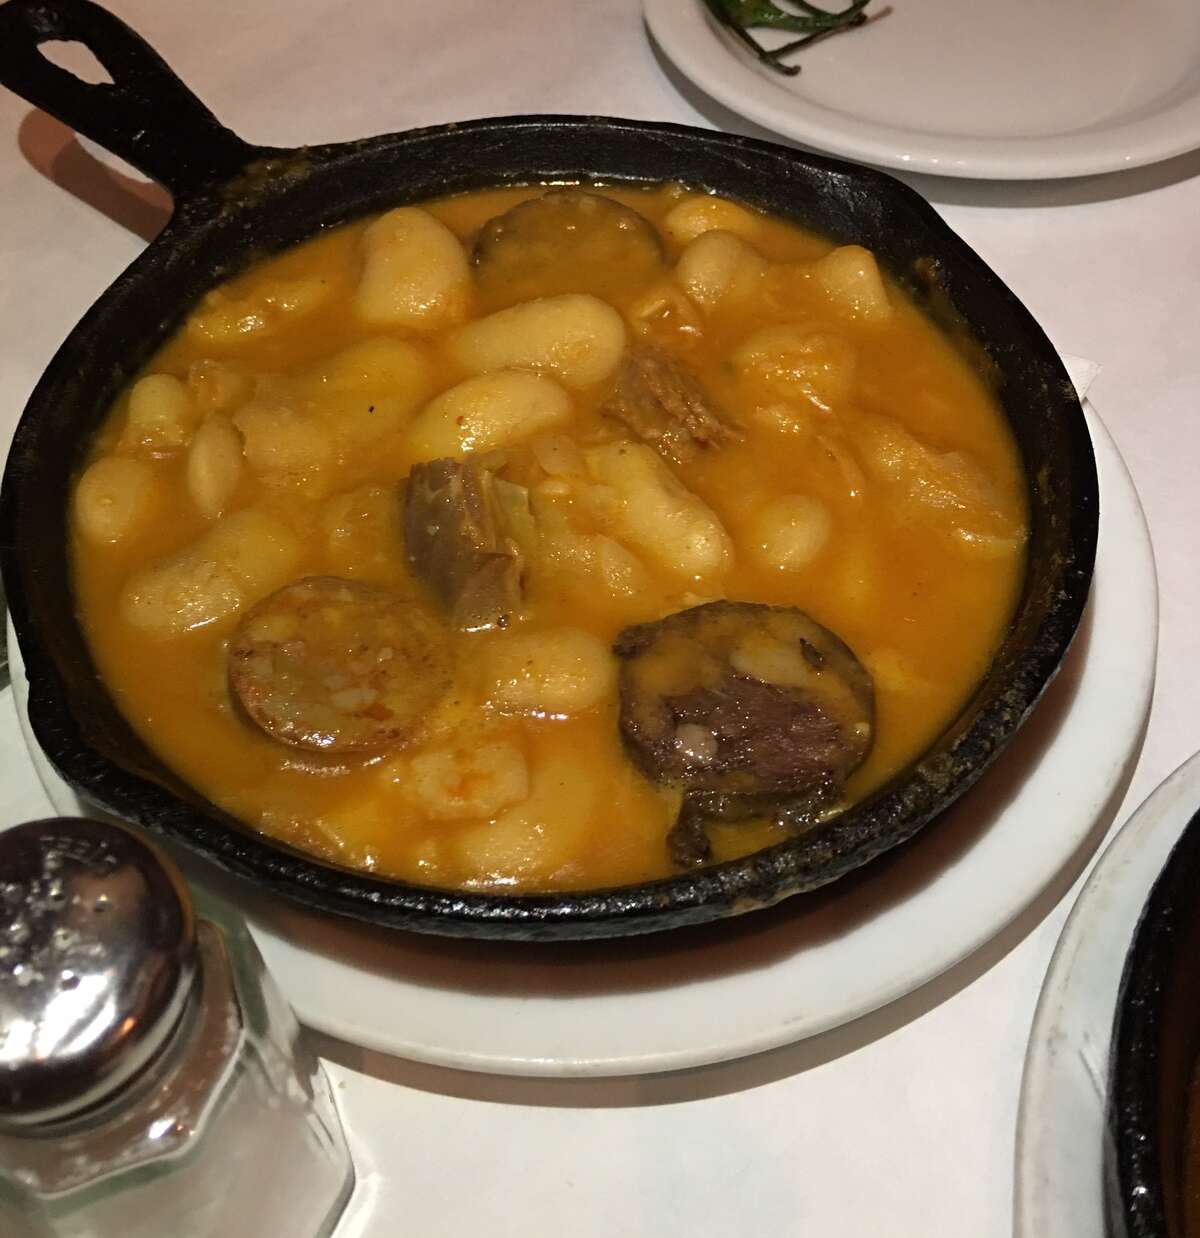 Large with beans with sausage and ham ($9.25)